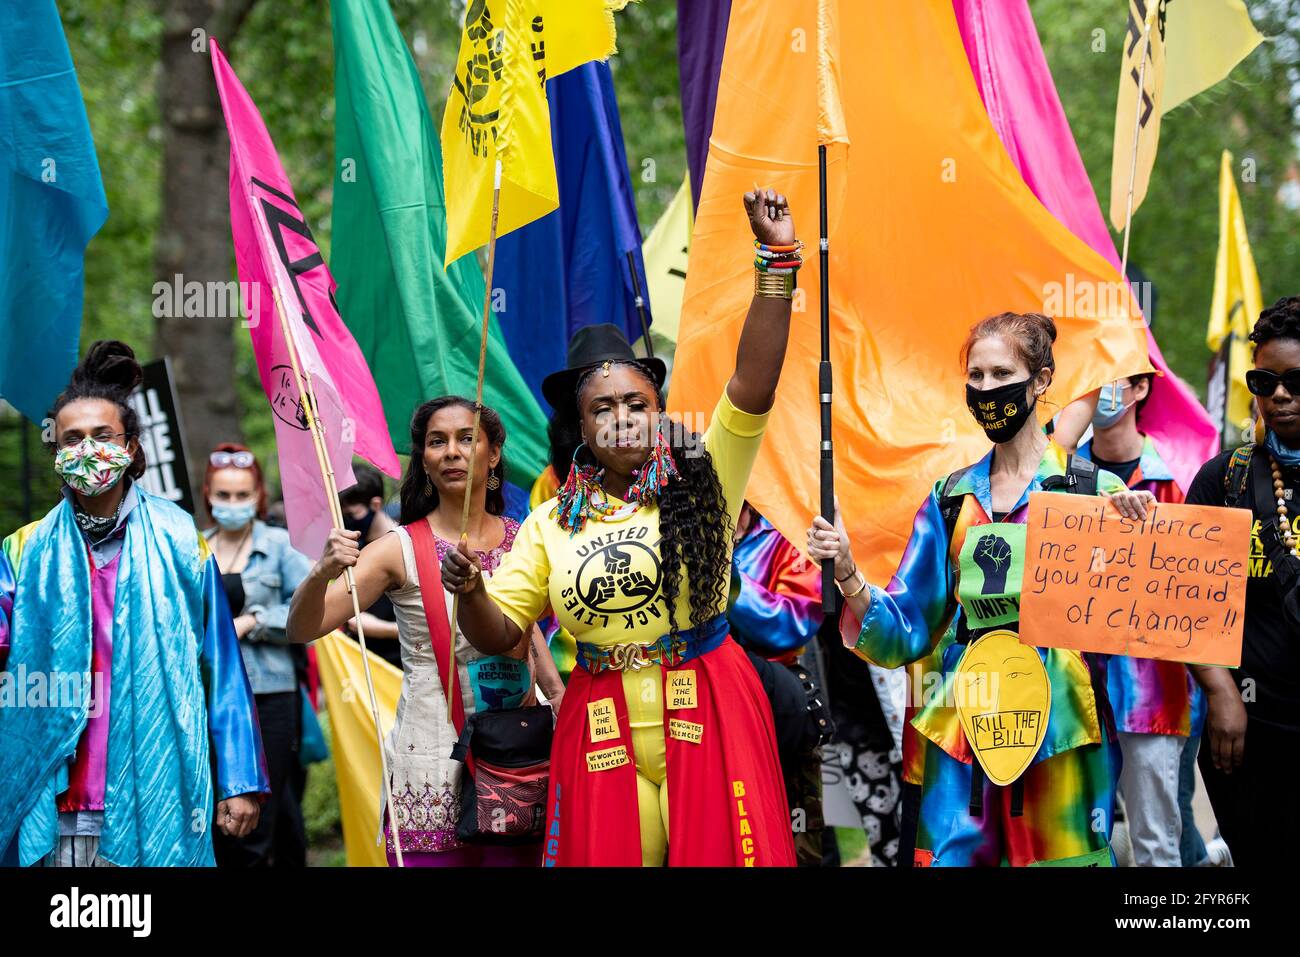 London, UK. 29th May, 2021. Protesters hold colorful flags during the Kill the Bill IV Protest in London to condemn a proposed bill that will give police and the Home Secretary increased power to stop protests.The rallies are being held against the Police, Crime, Sentencing and Courts Bill. Credit: SOPA Images Limited/Alamy Live News Stock Photo